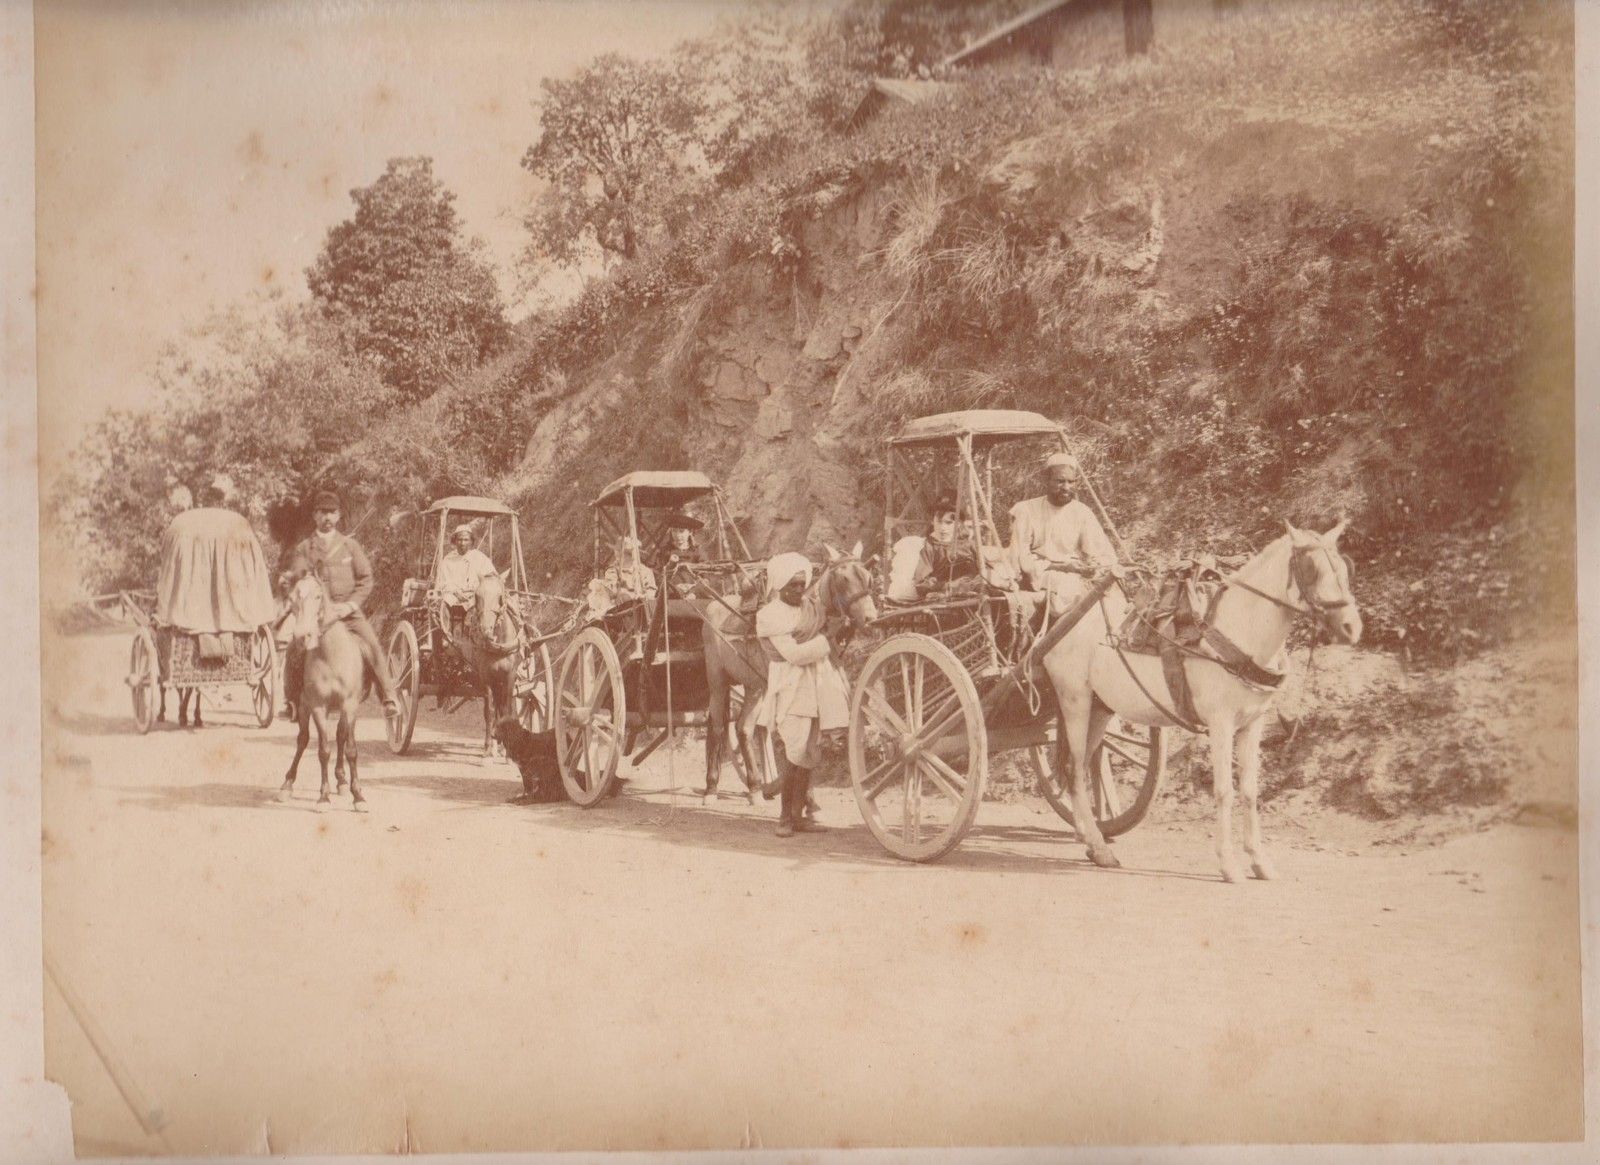 Horse Carts on a Mountain Road - India c1870's